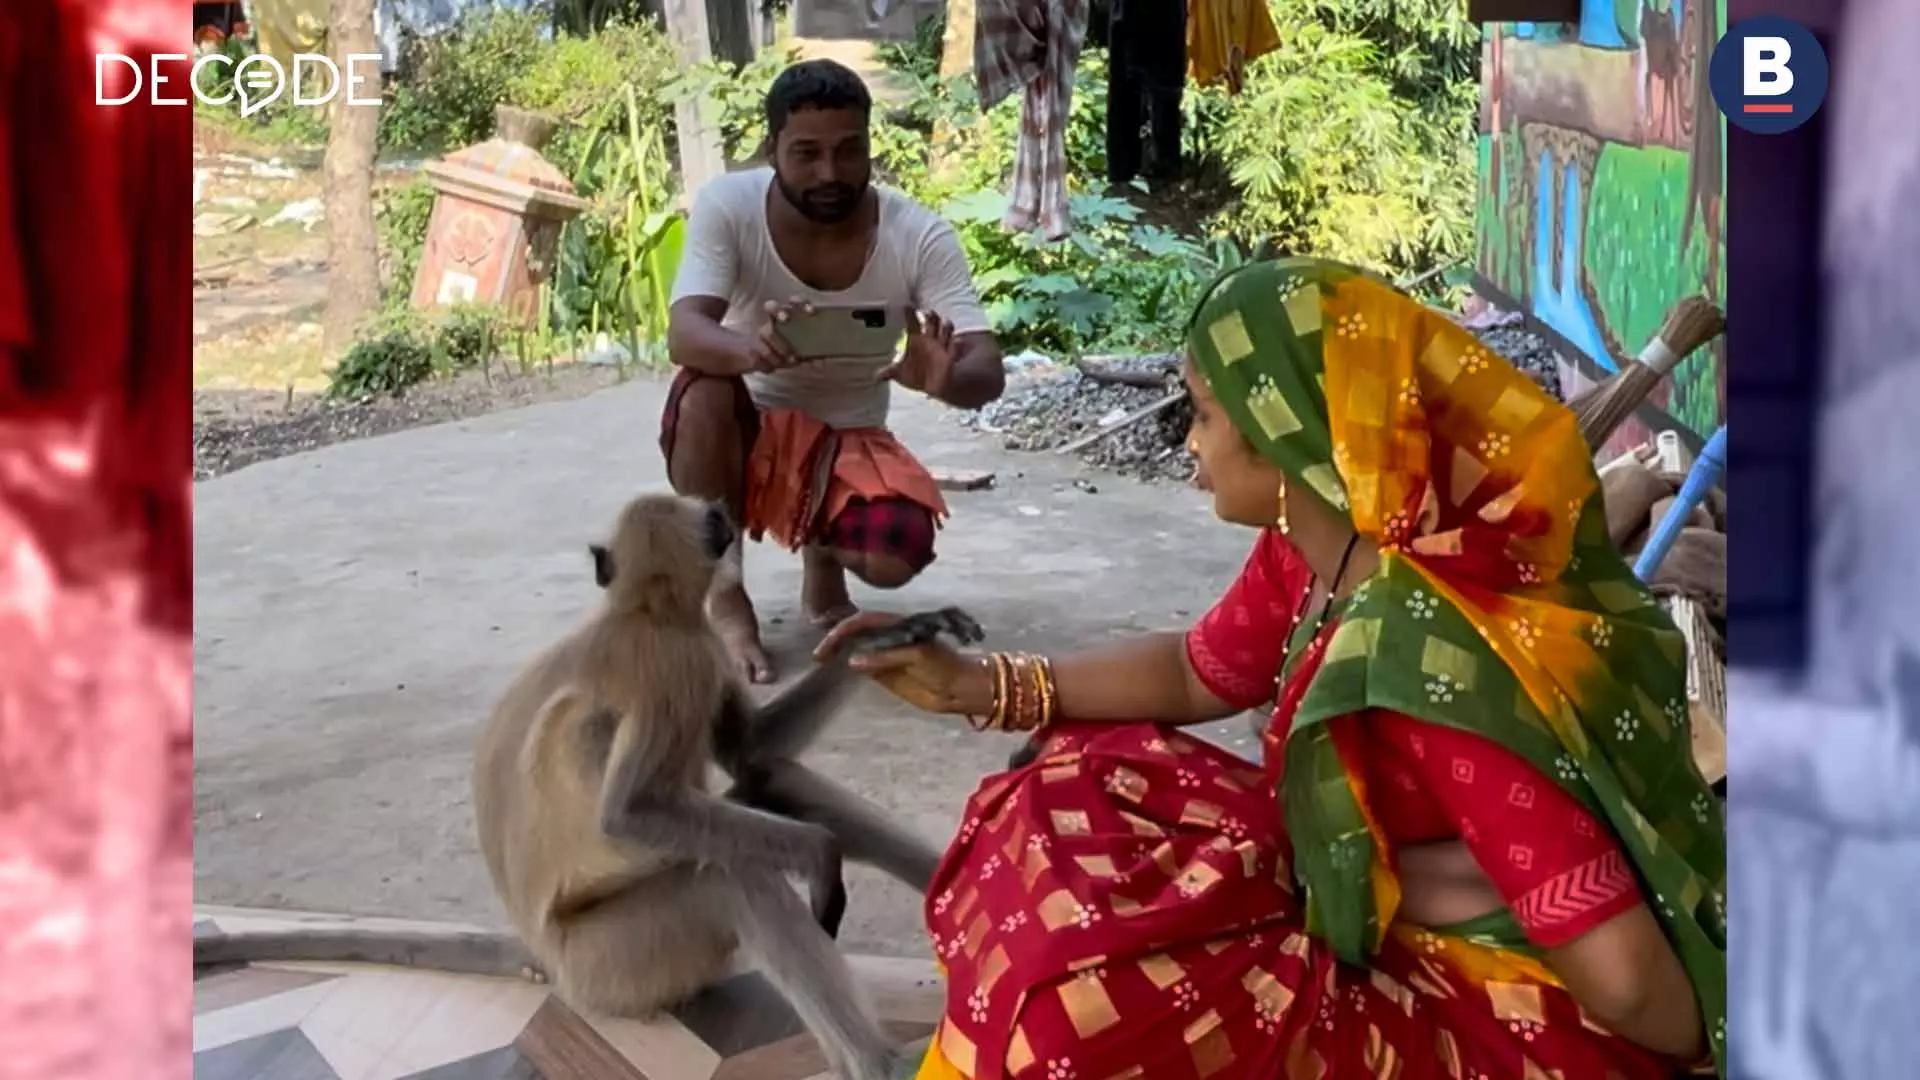 An Odisha Village Couple Was Hit With FIRs Over Their Viral Pet Monkeys